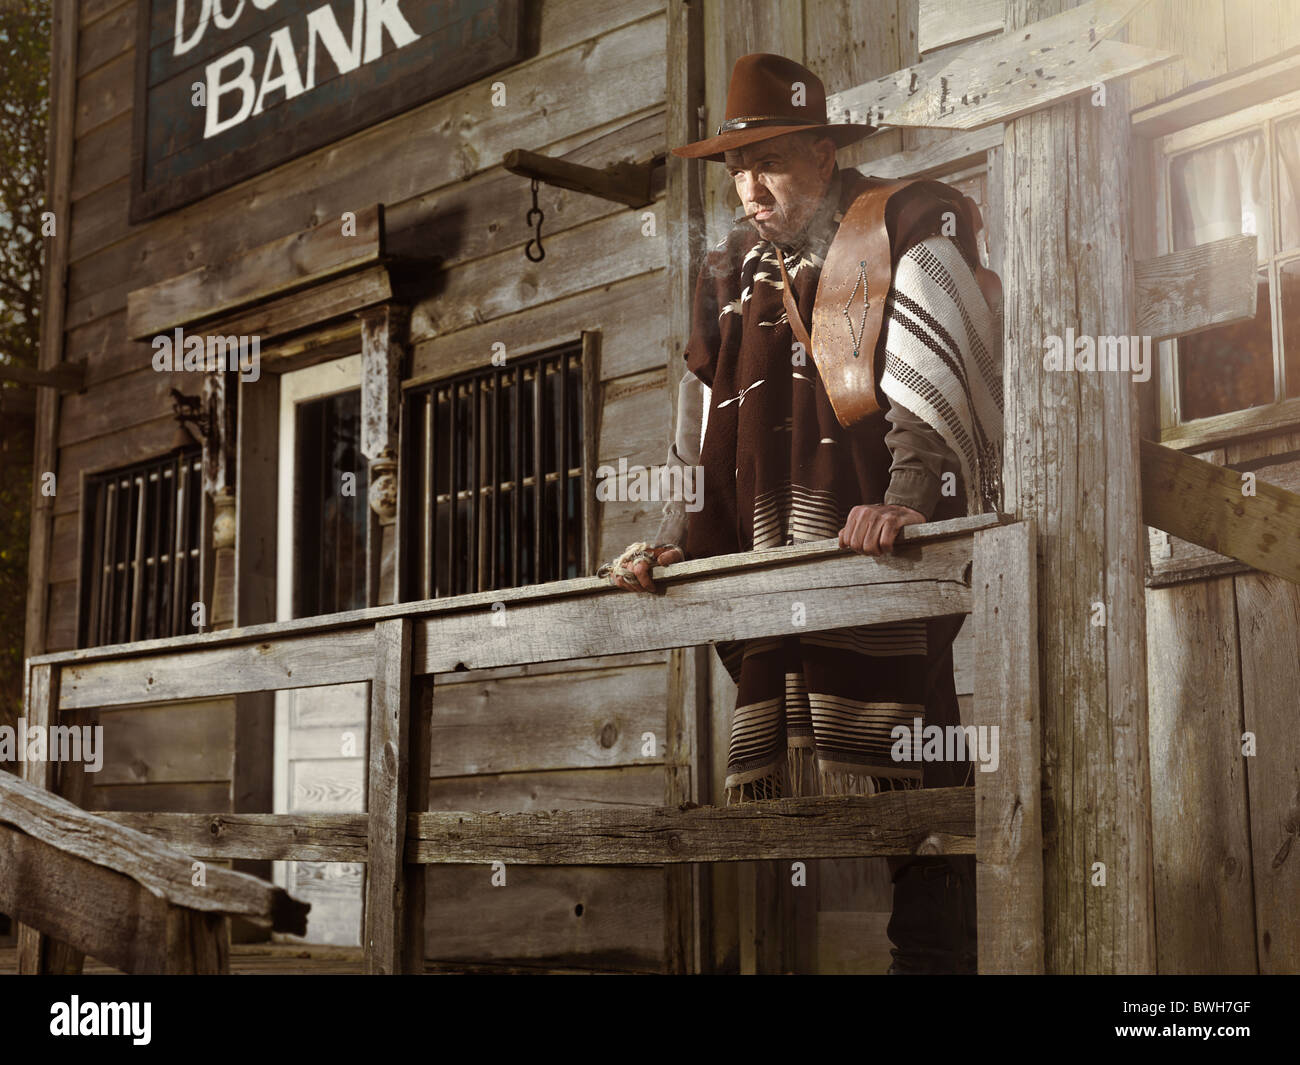 Cowboy with a cigar in his mouth standing in outside of a bank building Stock Photo